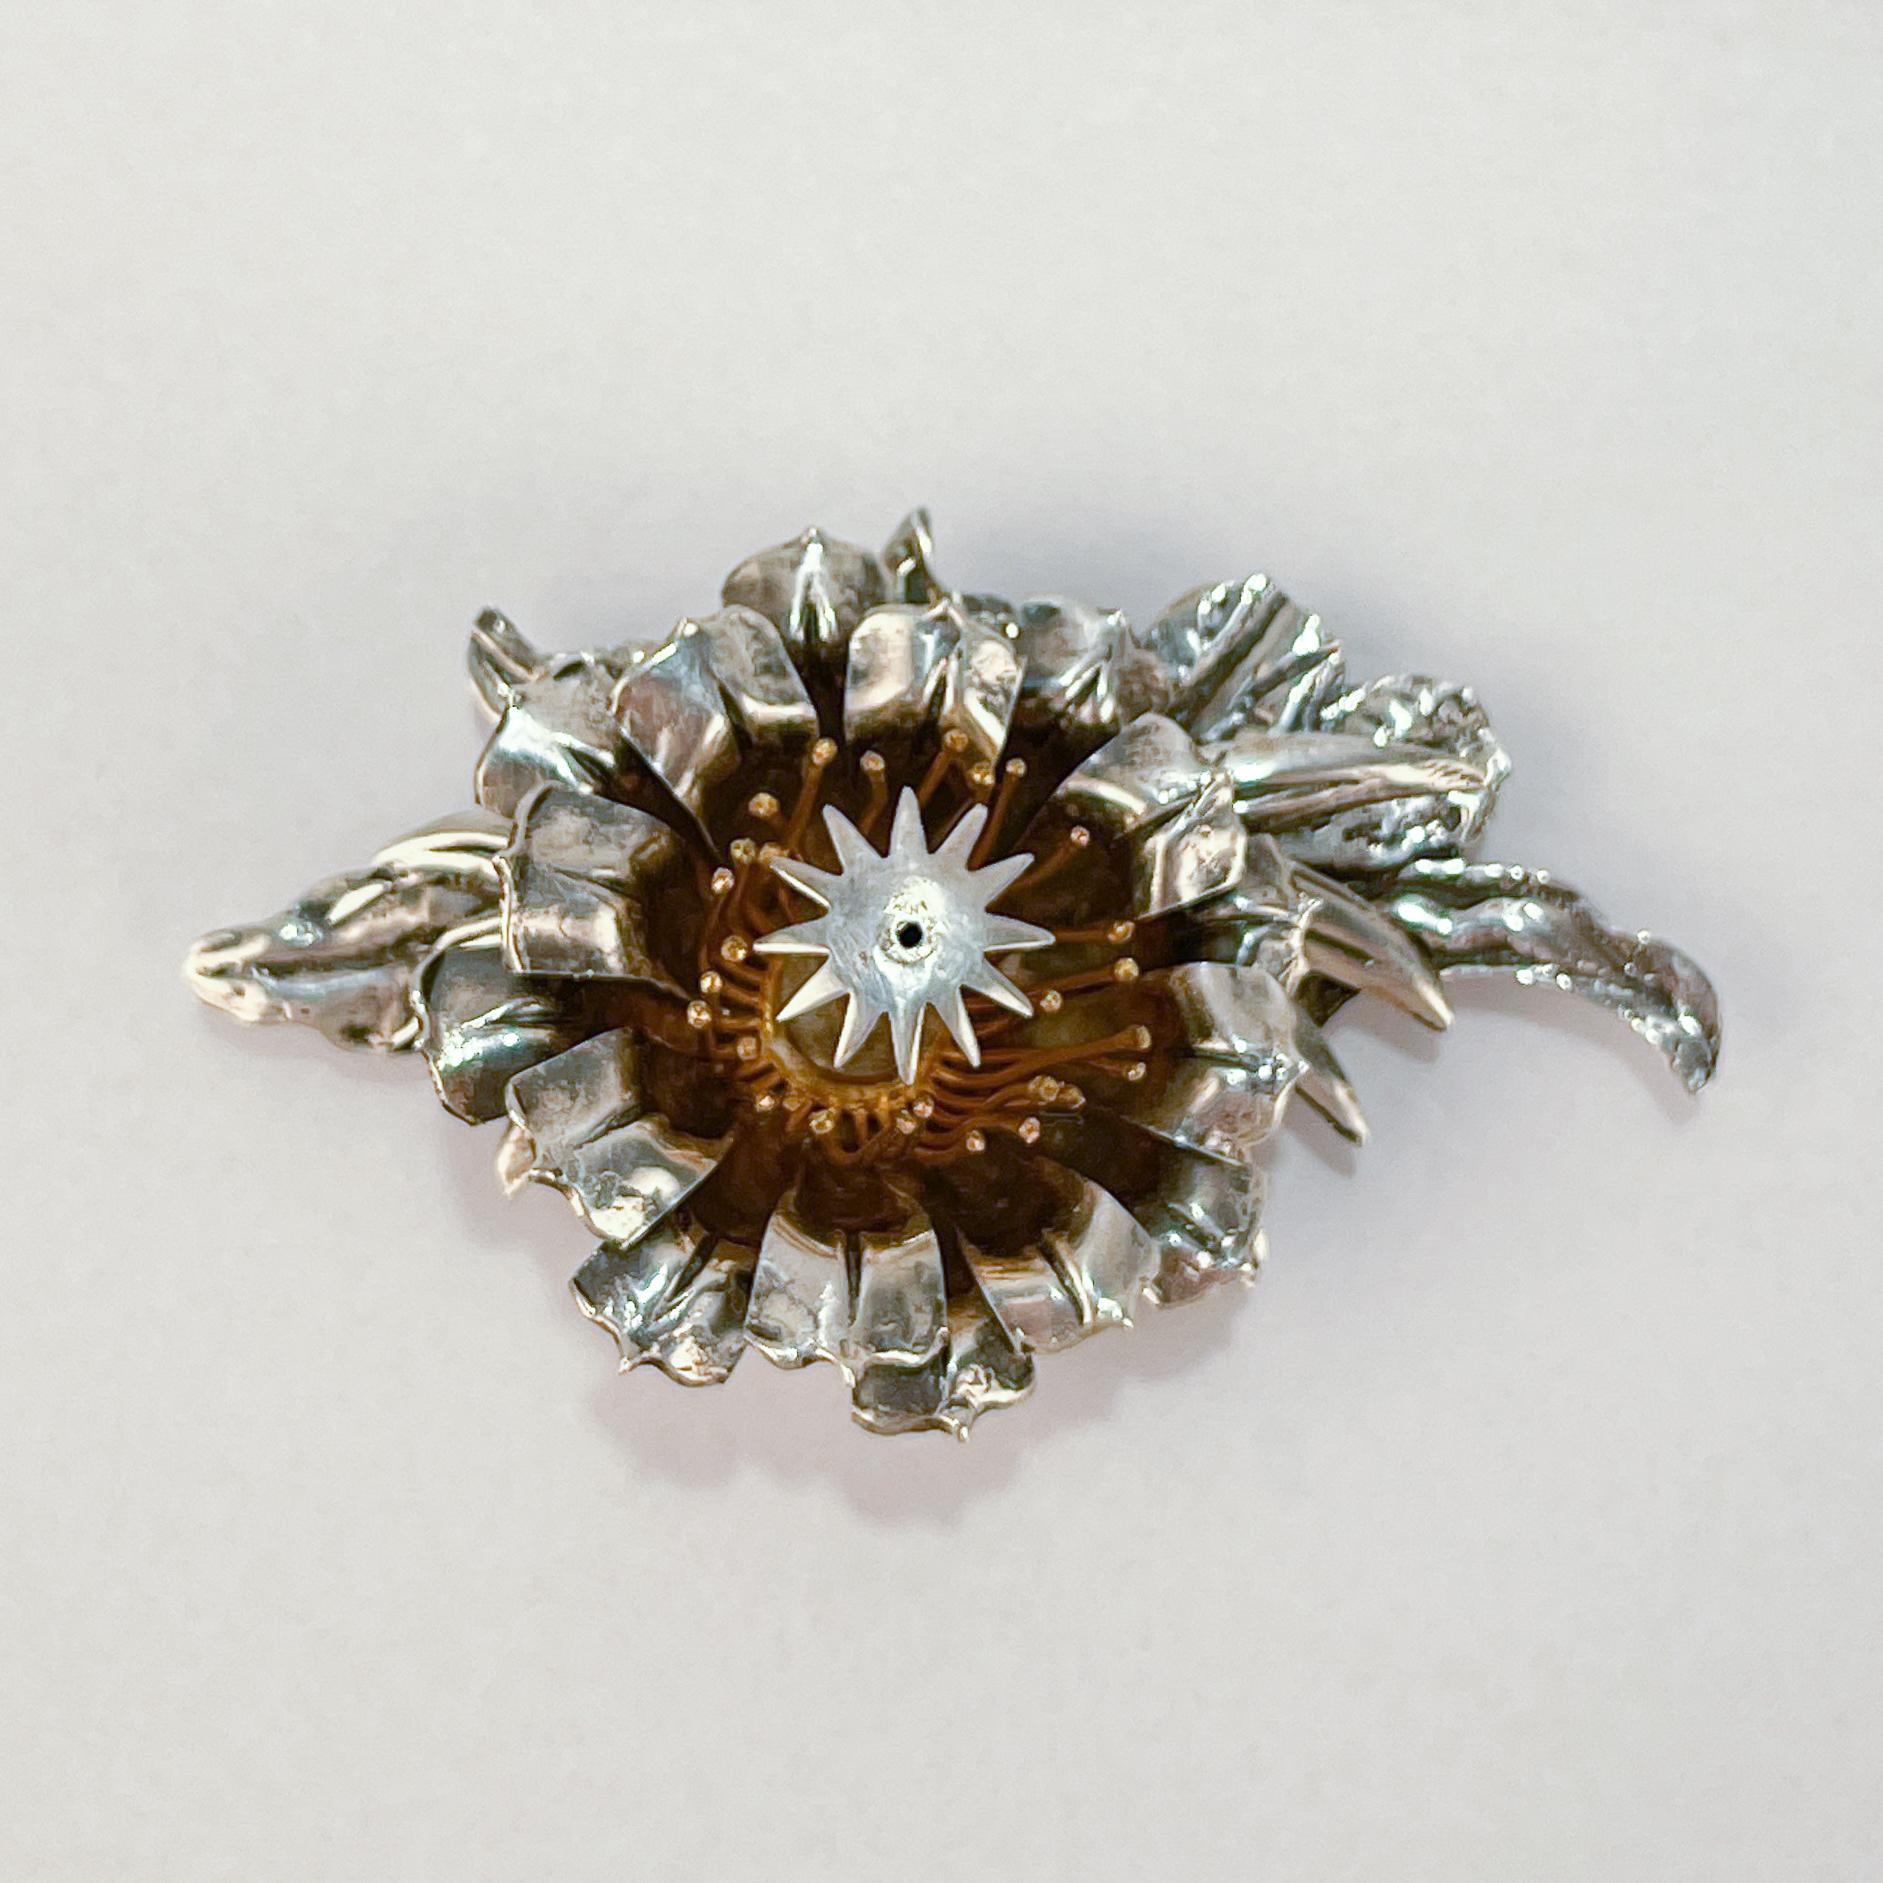 A very fine large, Hawaiian sterling silver brooch.

Made in Mexico for Floy Mercer.

With layered tropical sterling silver flower petals set on a figural leaf base.

Simply a great piece of Hawaiiana!

Date:
20th Century

Overall Condition:
It is